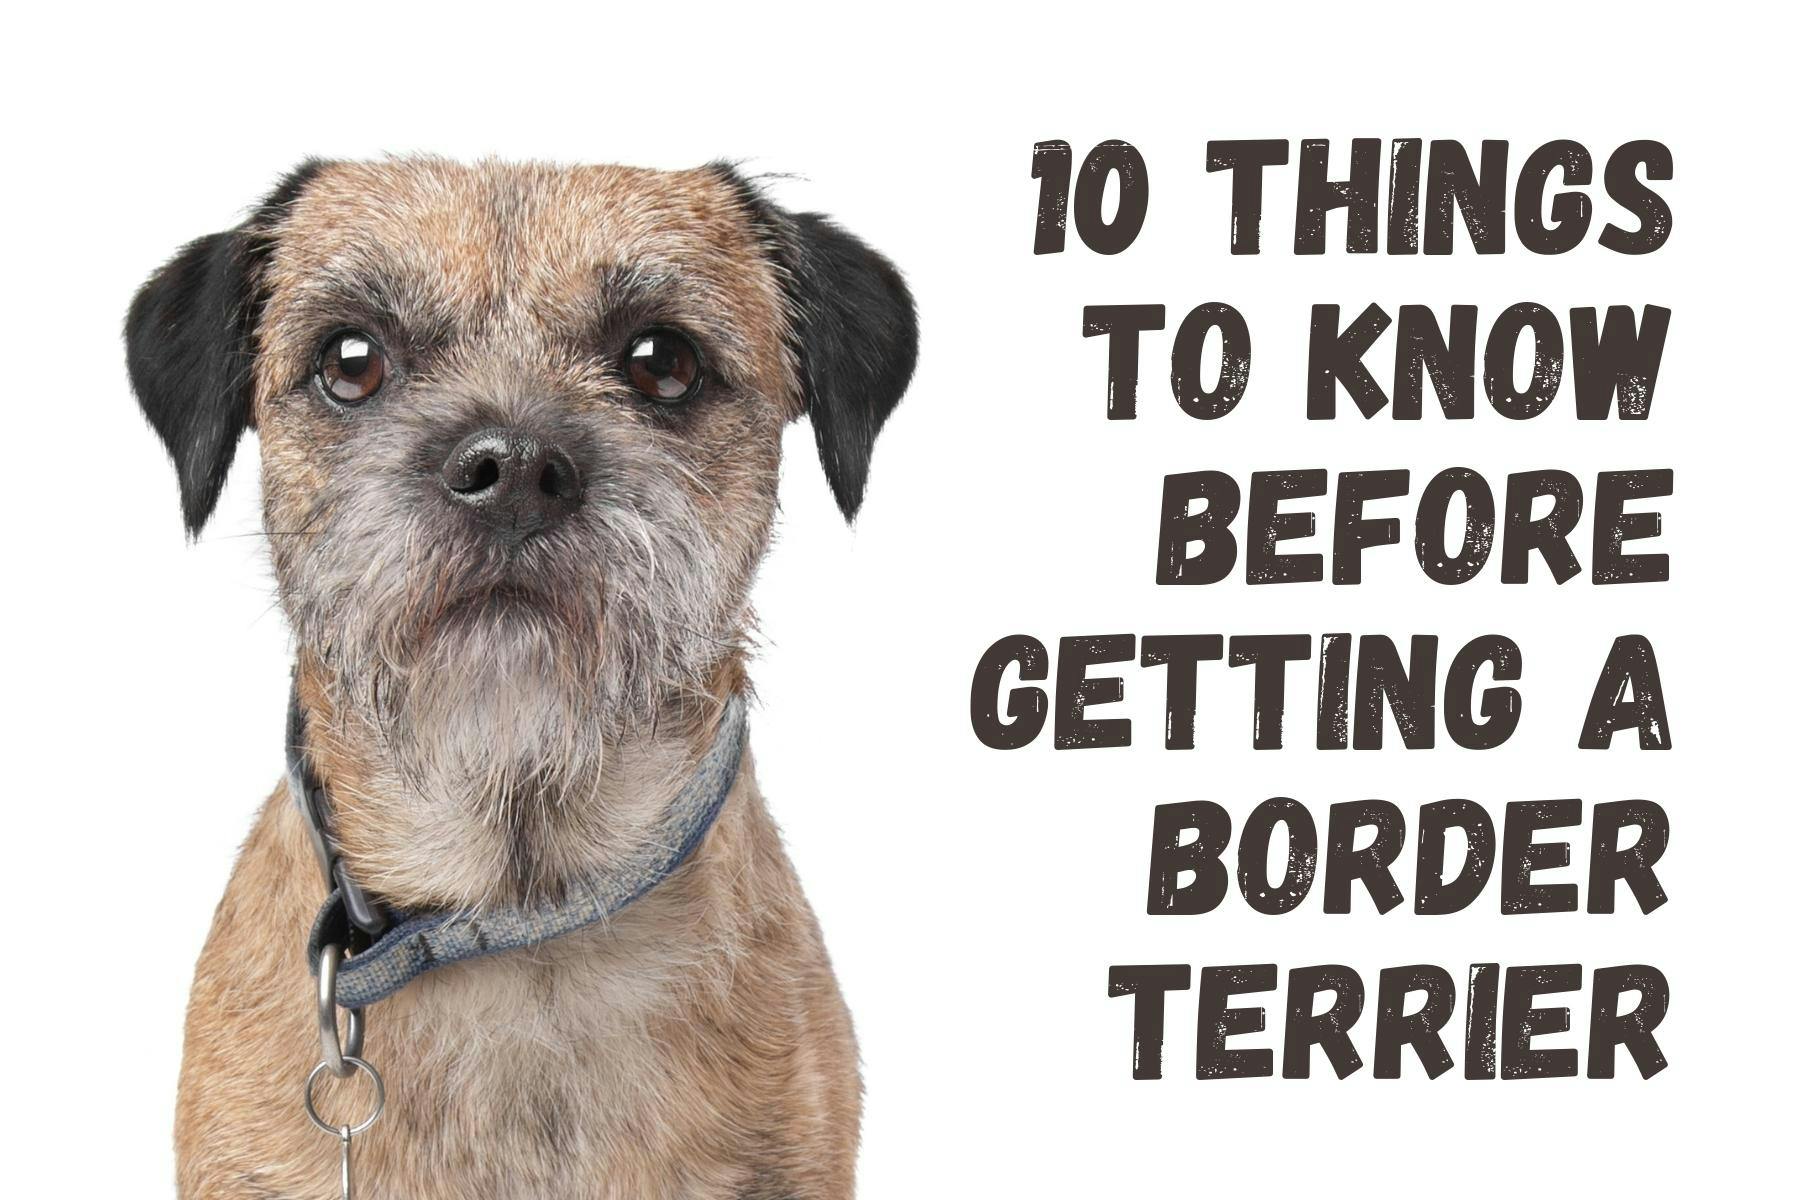 What You Should Know Before Adopting a Border Terrier